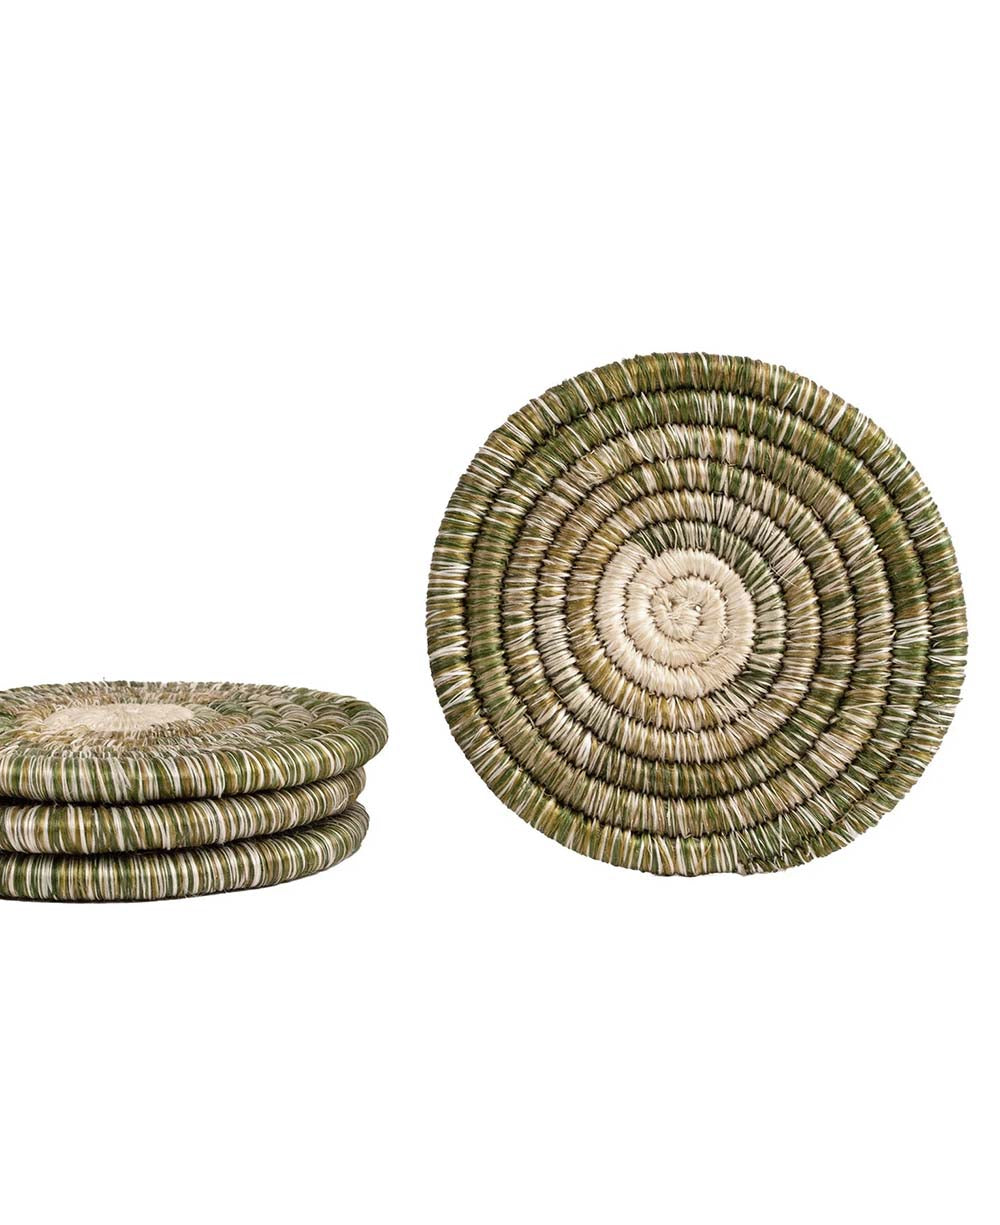 Set of 4 intricately designed African-inspired coasters